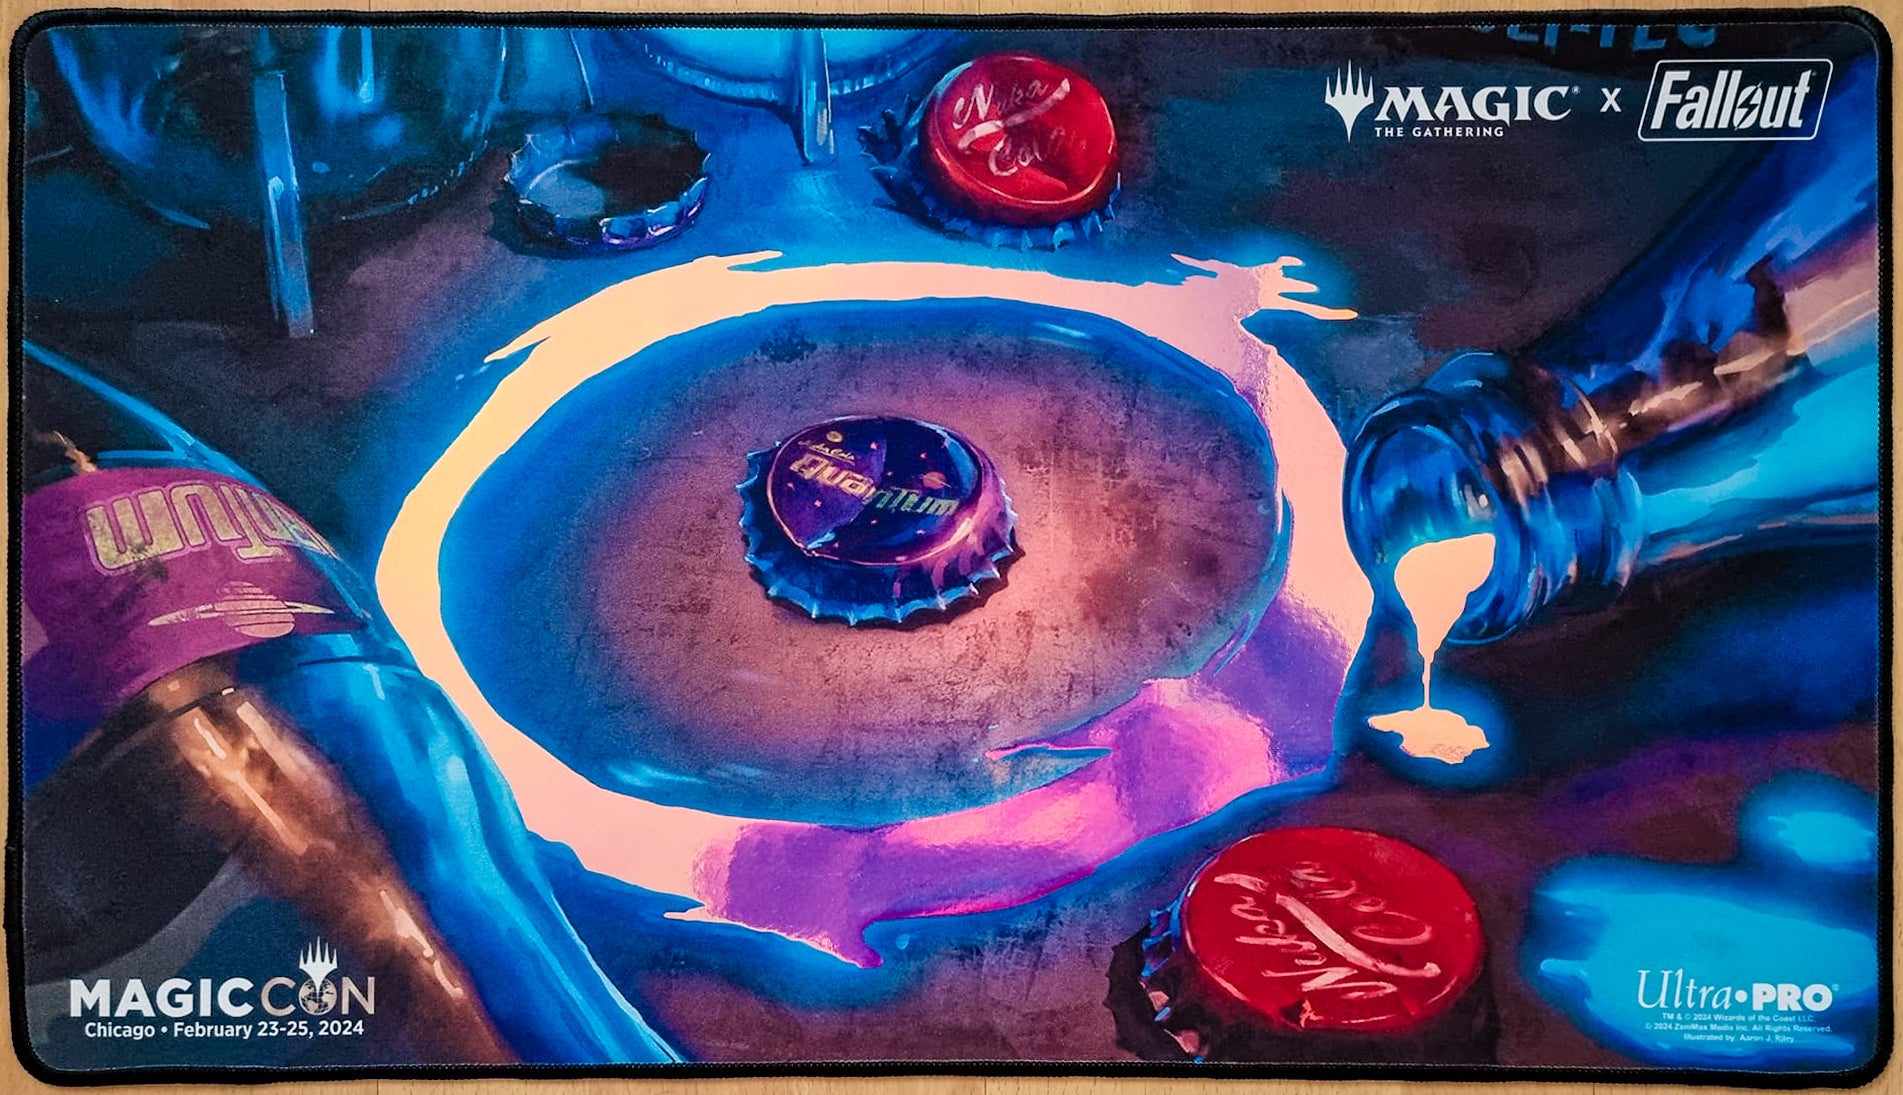 Sol Ring [Nuka-Cola Quantum Variant] - Aaron J. Riley - MagicCon Chicago 2024 - Limited Edition [500 Copies] - Foil - Embroidered - MTG Playmat